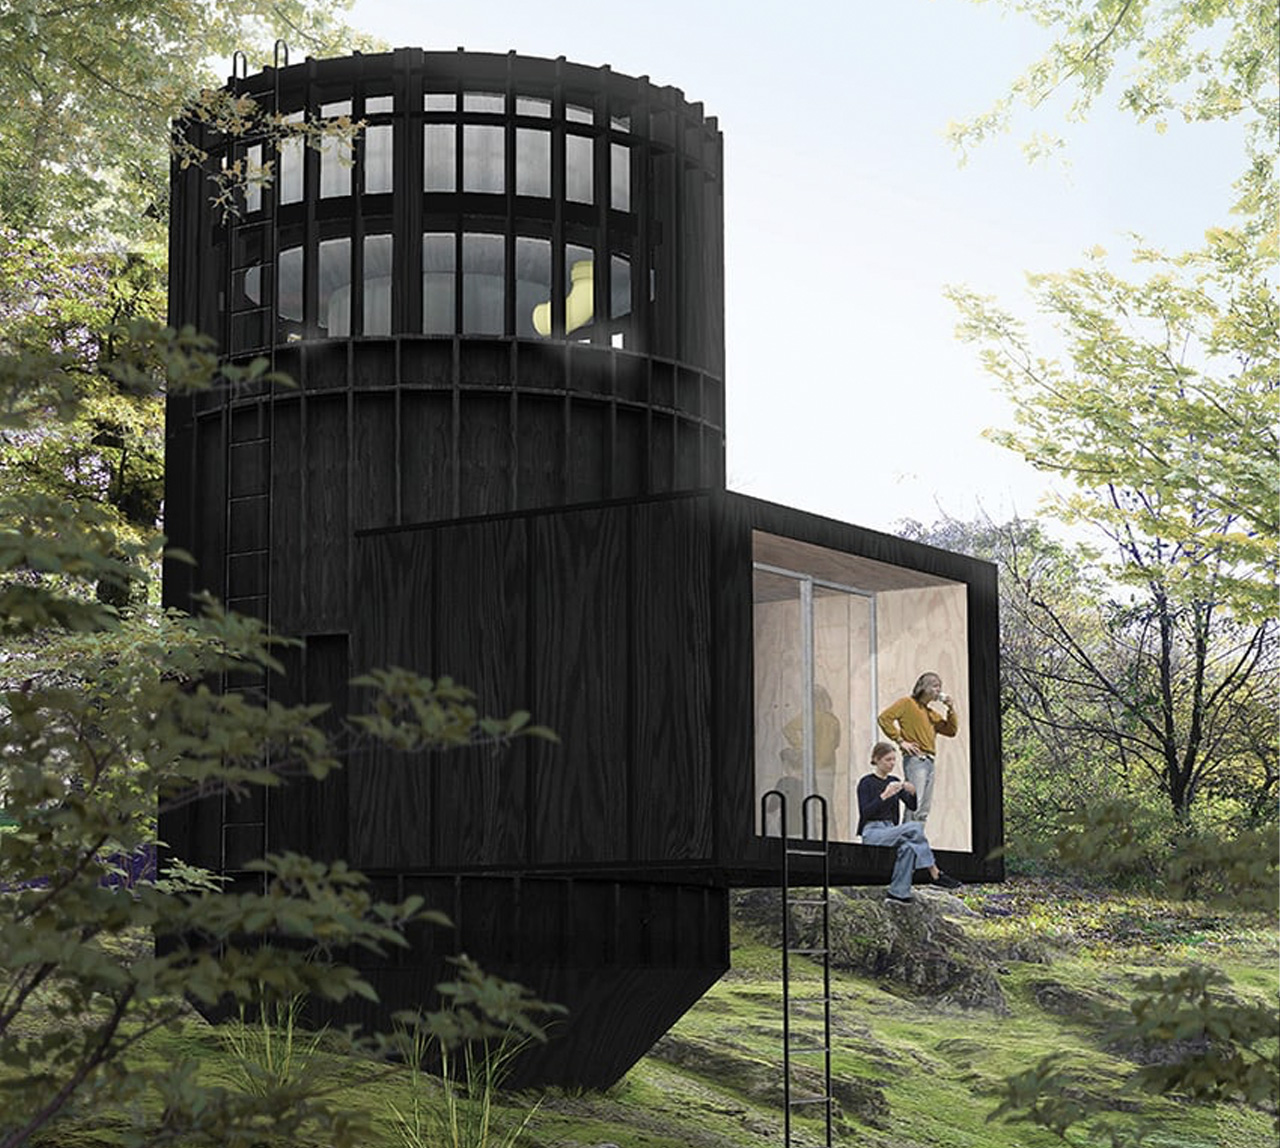 This conceptual micro-cabin revolves on a rotating display unveiling three ‘scenes’ or rooms of a home